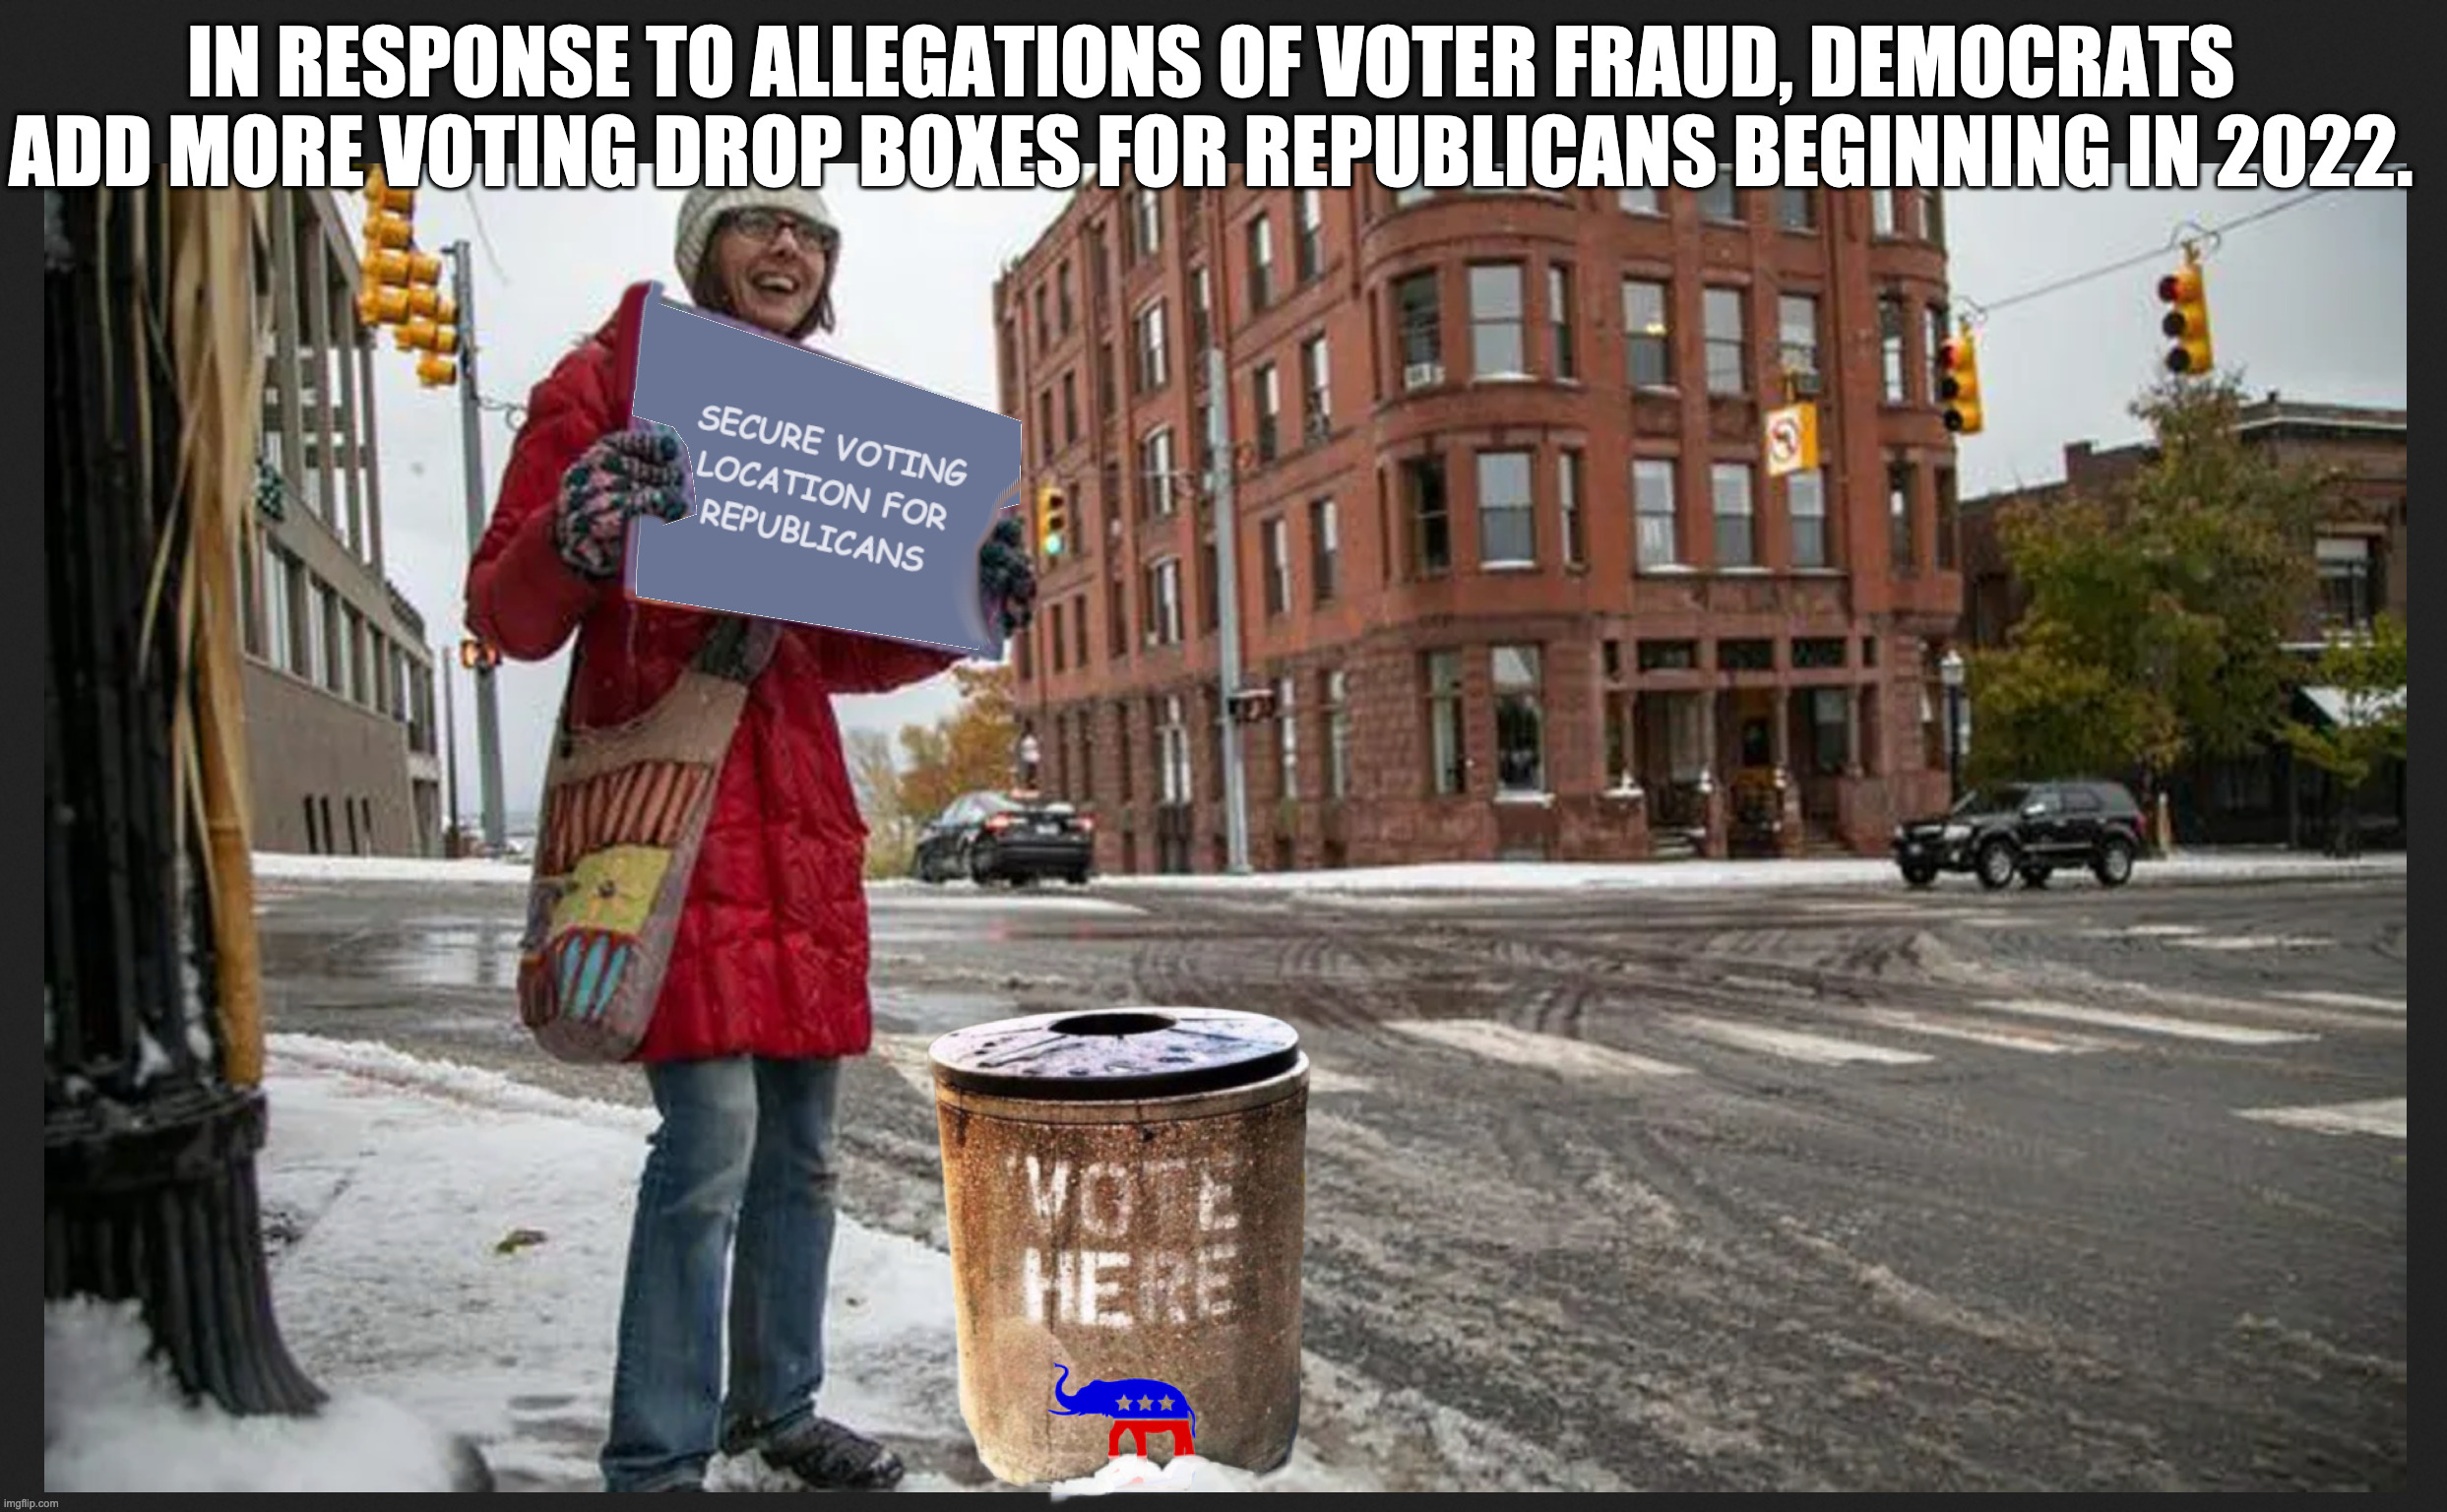 SEEMS LEGIT | IN RESPONSE TO ALLEGATIONS OF VOTER FRAUD, DEMOCRATS ADD MORE VOTING DROP BOXES FOR REPUBLICANS BEGINNING IN 2022. | image tagged in democrats,demorats,voting | made w/ Imgflip meme maker